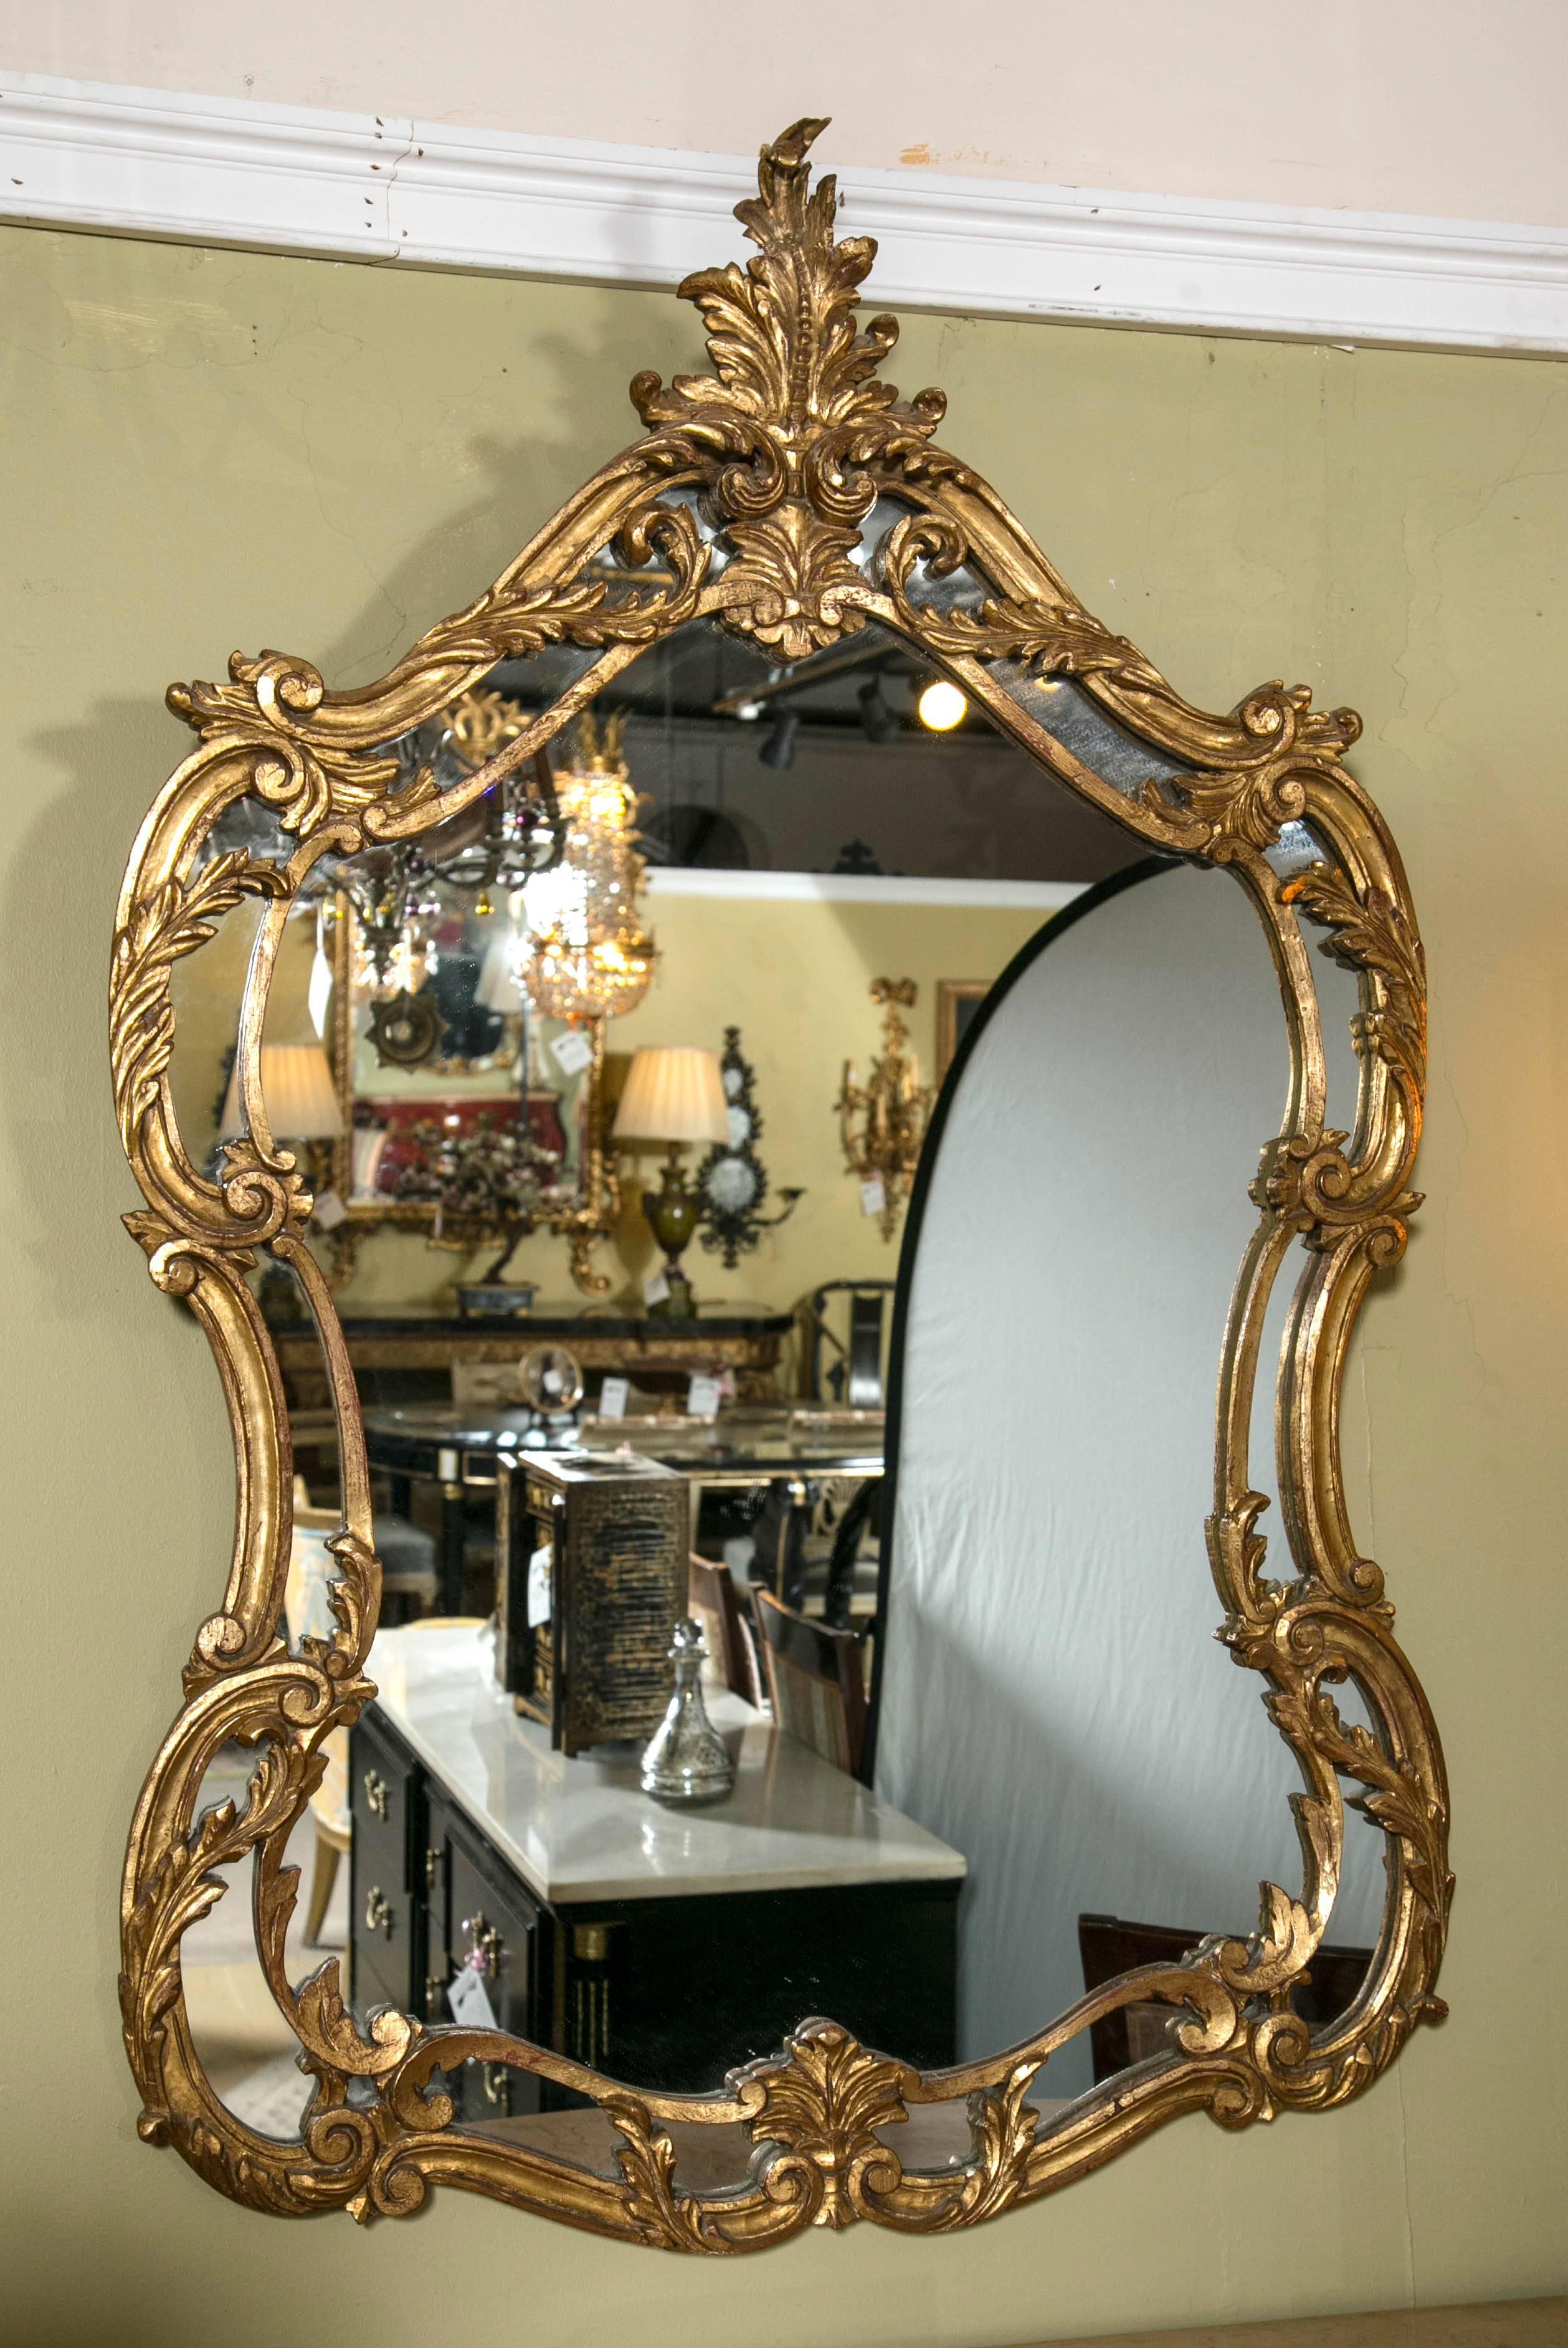 A pair of Italian leaf and scroll giltwood mirrors. This pair of Louis XV style mirrors are finely carved and detailed having a leaf and scroll design giltwood double frame. With wooden backings. 

Measures: 52.5